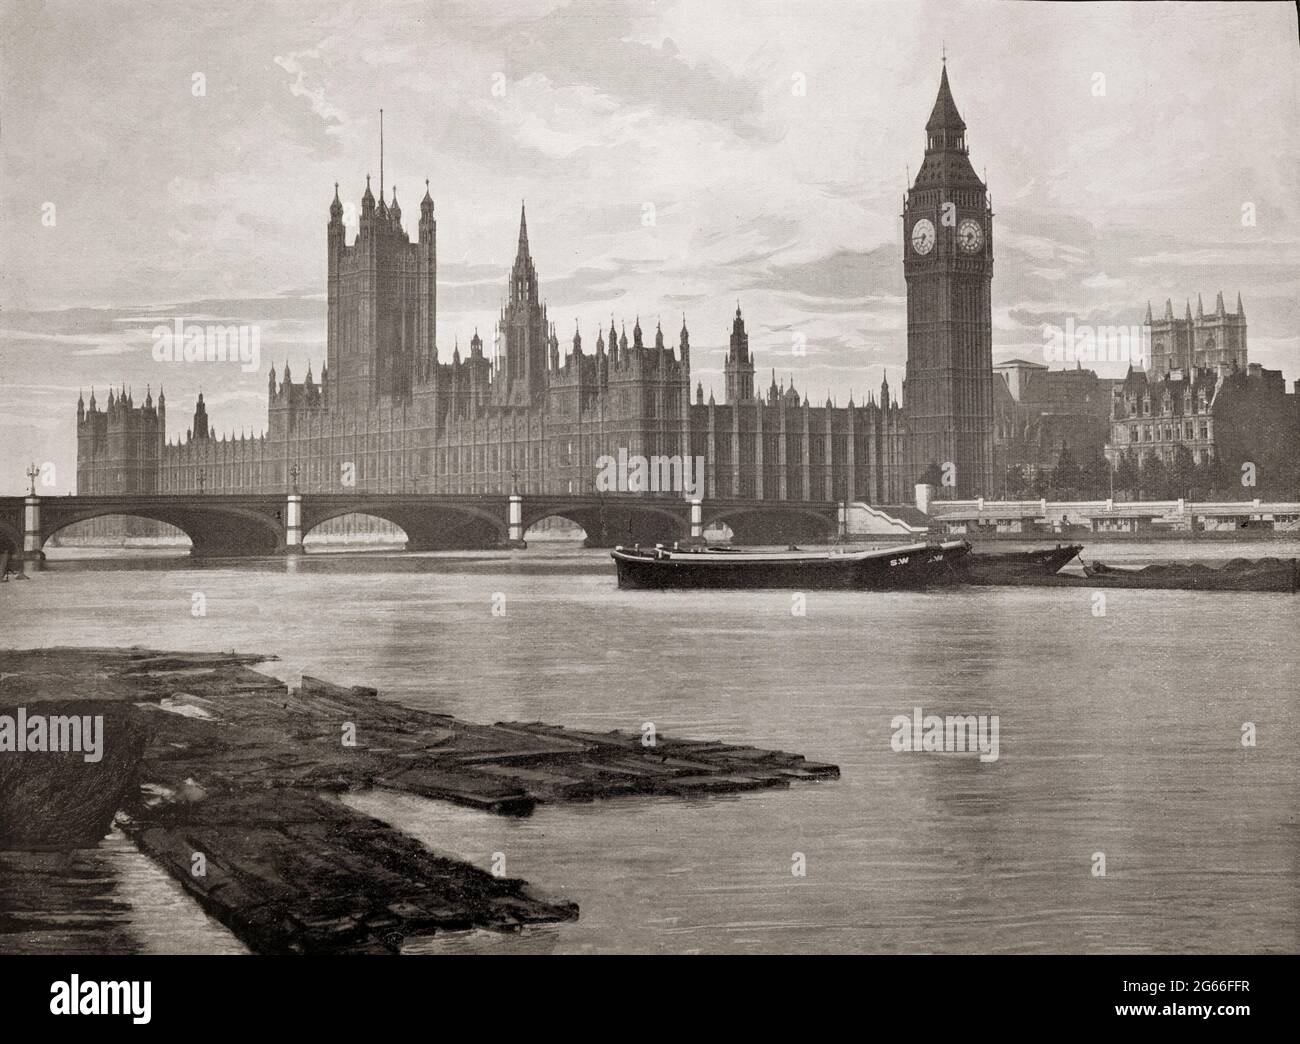 A late 19th century view of The Palace of Westminster seen from across the River Thames with Westminster Bridge in the foreground. The meeting place for both the House of Commons and the House of Lords, the two houses of the Parliament of the UK it lies on the north bank of the River Thames in the City of Westminster, in central London, England. After the original parliament buildings were destroyed by fire in 1834, the reconstructed buildings were designed in the English Perpendicular Gothic style of the 14th–16th centuries by the architect Charles Barry assisted by Augustus Pugin. Stock Photo